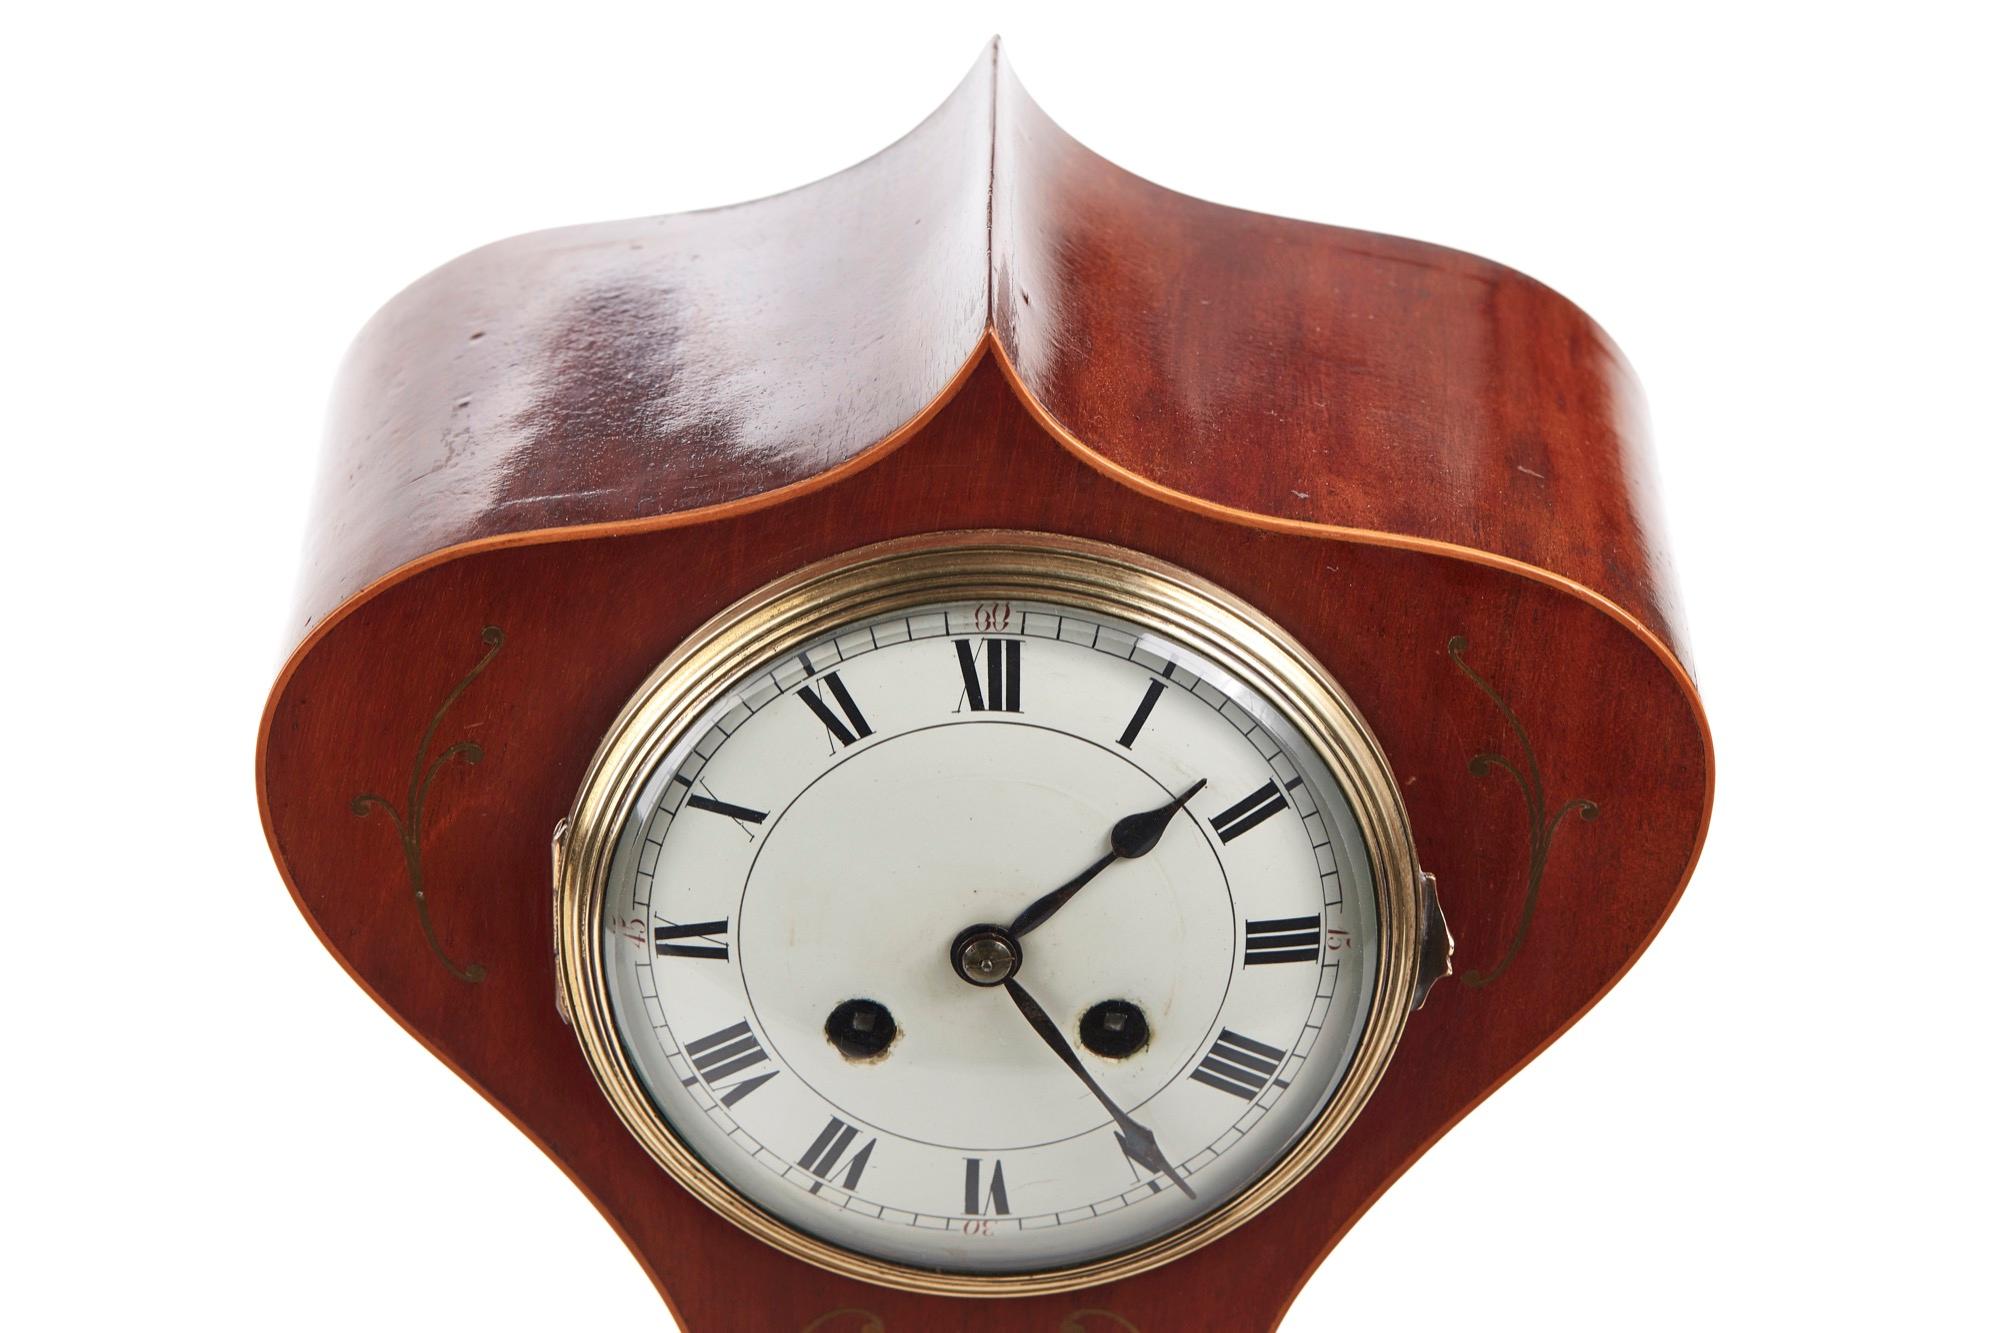 Antique brass inlaid mahogany Art Nouveau balloon shaped mantle clock, striking on a gong. 8 day movement. Original key and perfect working order.